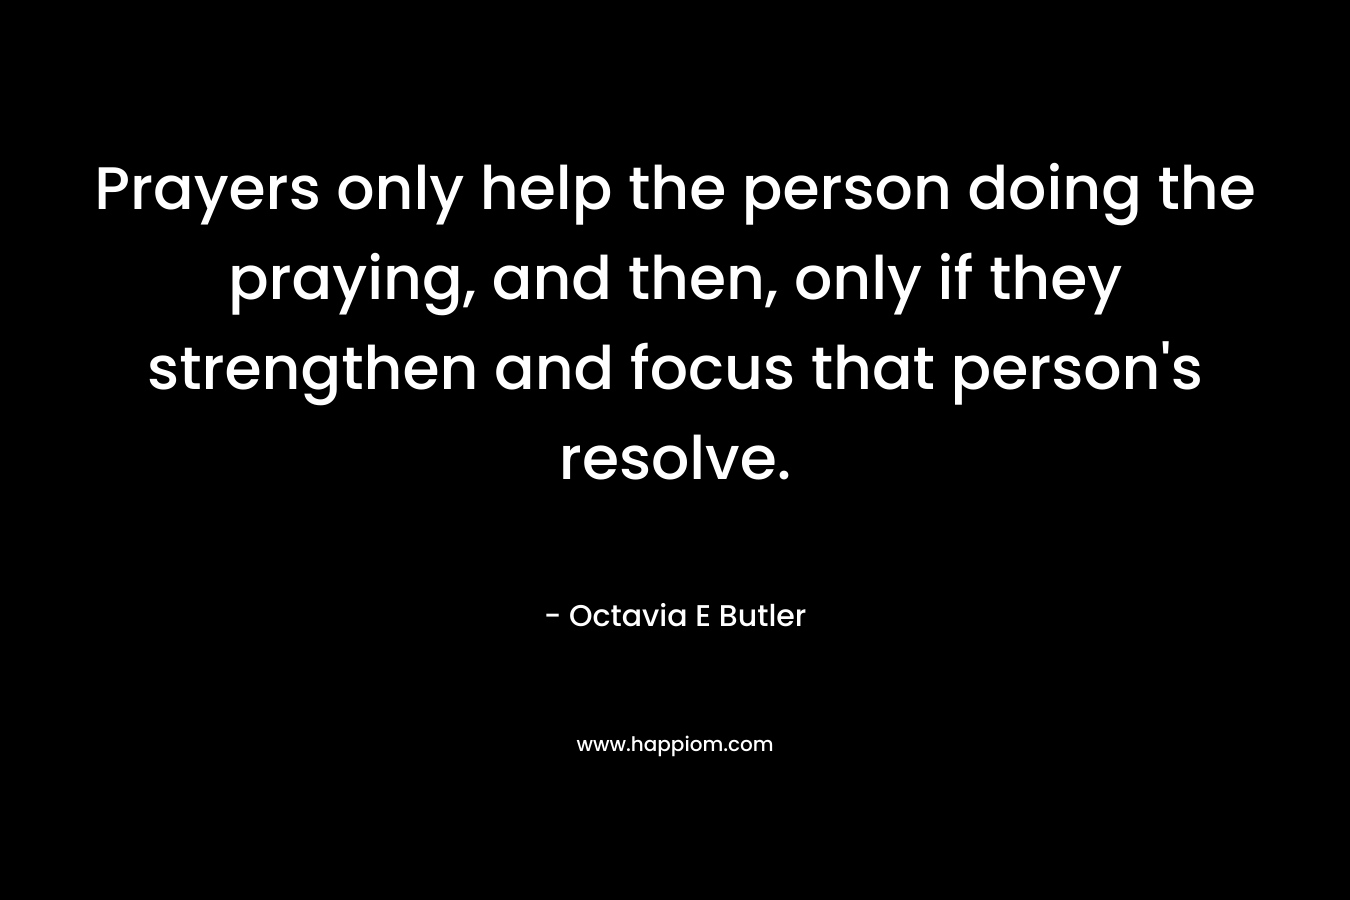 Prayers only help the person doing the praying, and then, only if they strengthen and focus that person’s resolve. – Octavia E Butler